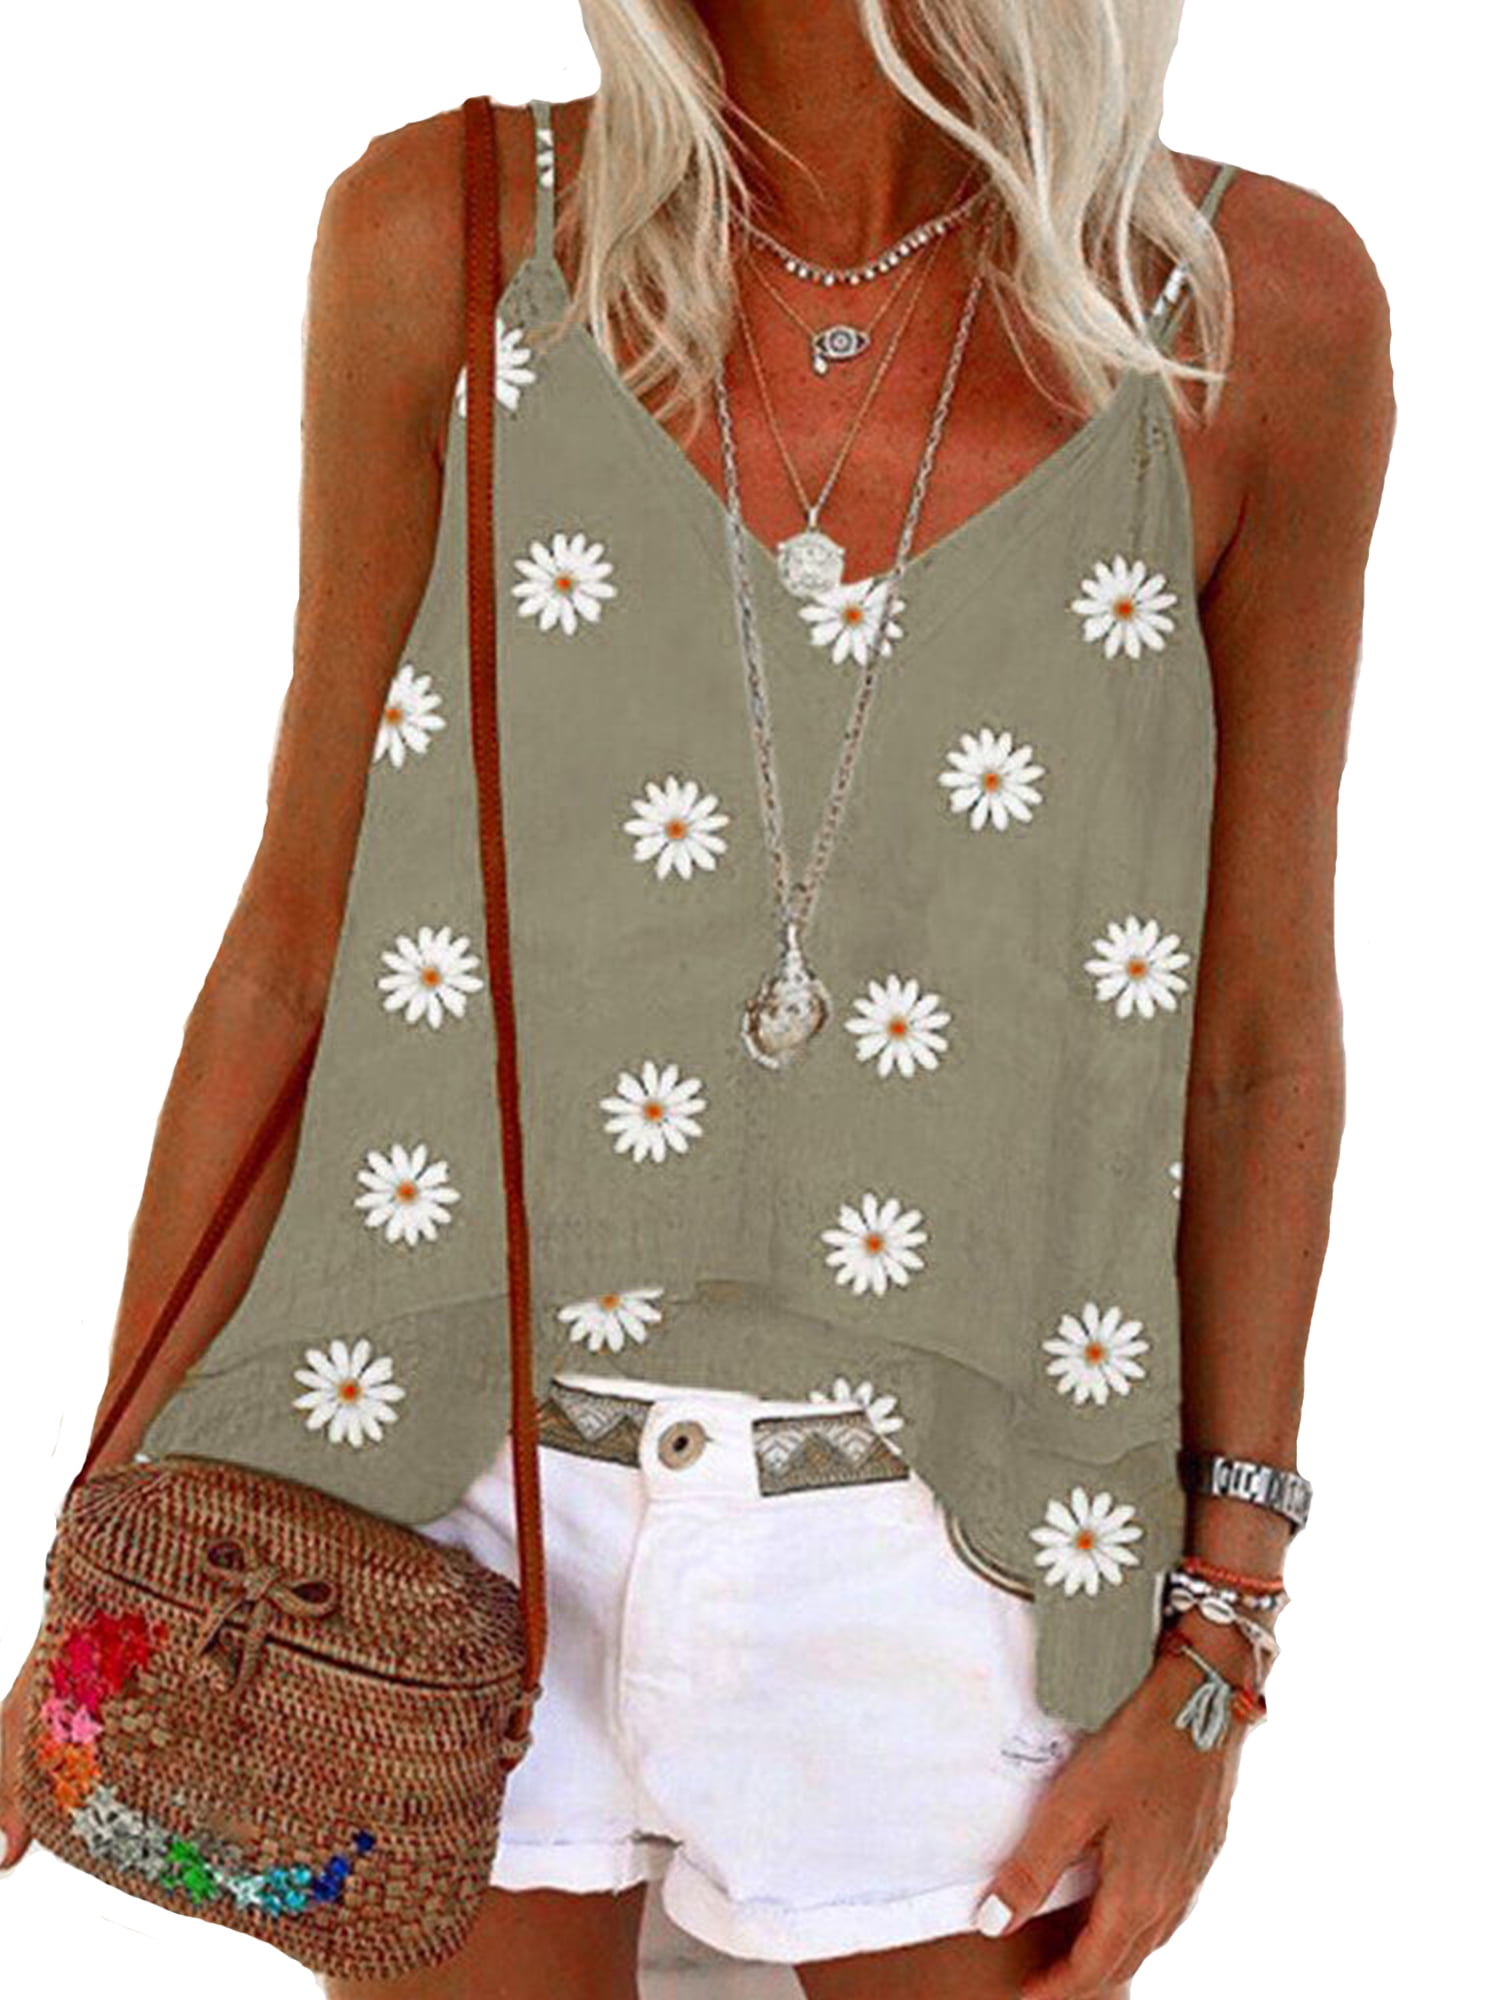 Womens Boho Floral Tank Top Ladies Summer Sleeveless Vest Blouse Casual Shirts